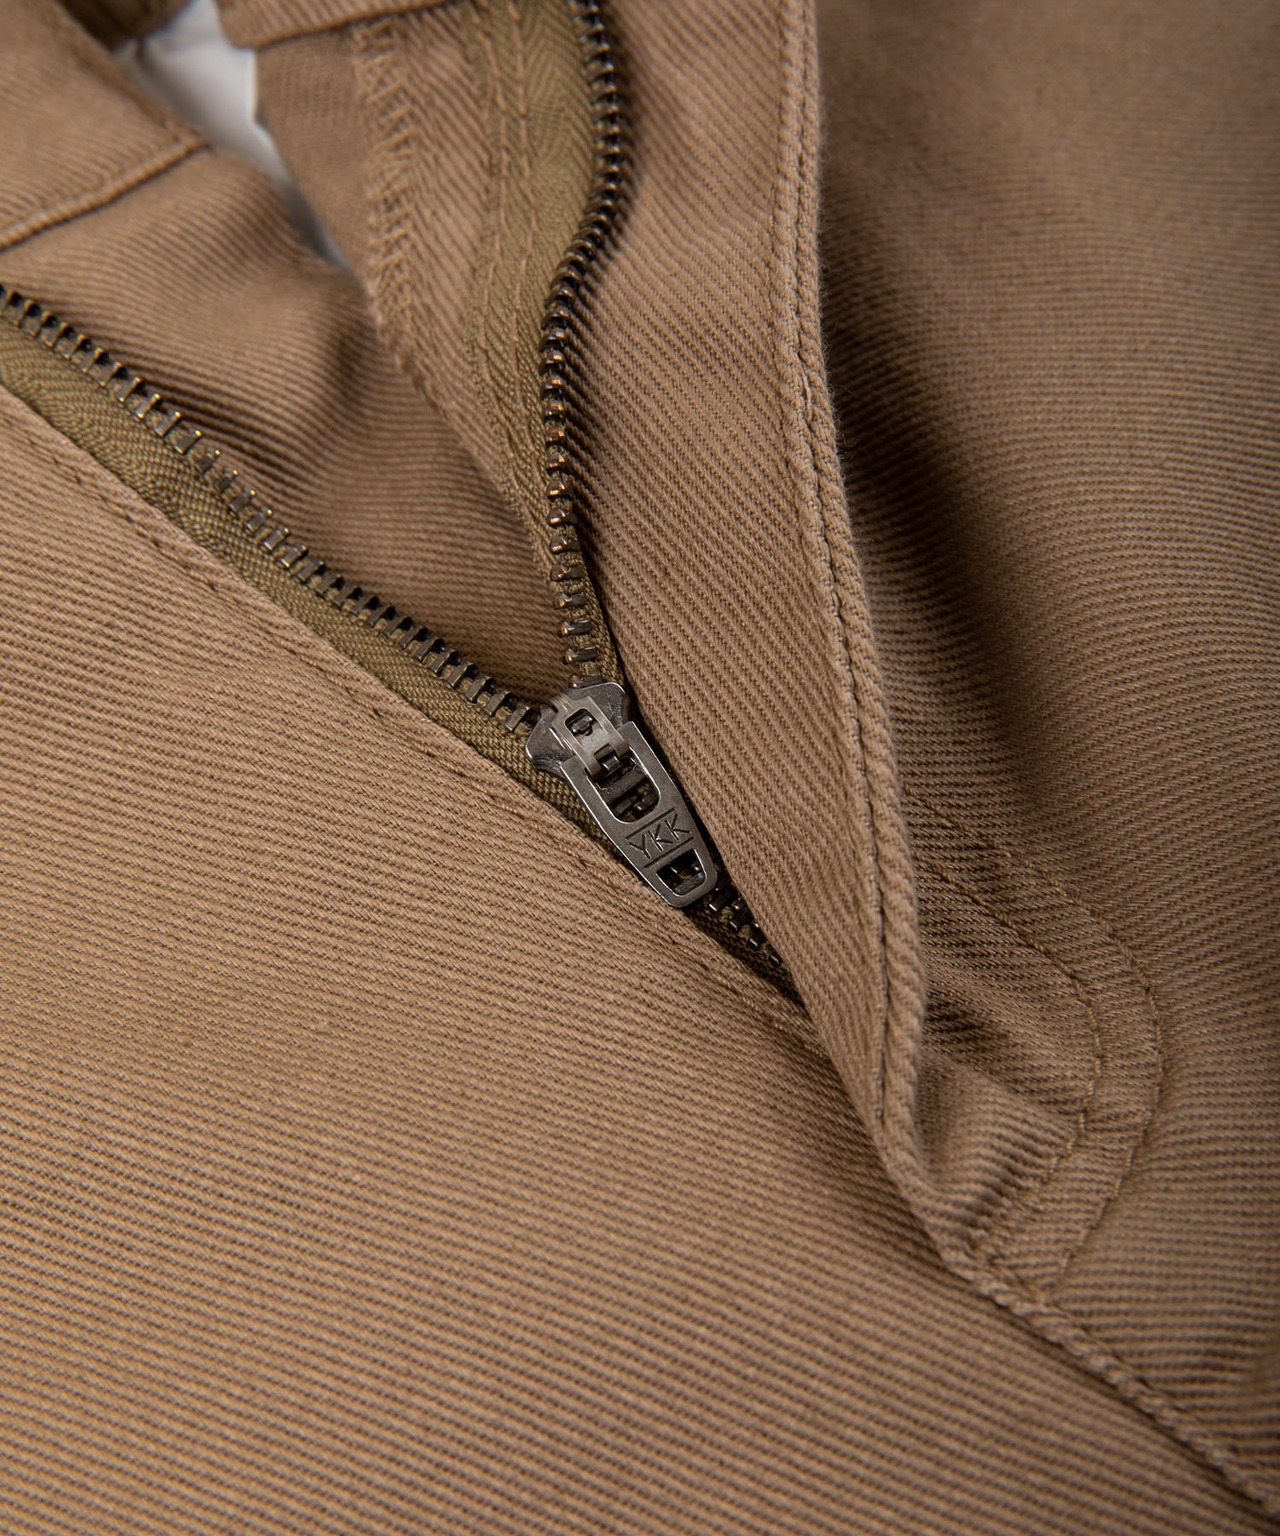 【#Re:room】COLOR CHINO SHORTS［REP218］